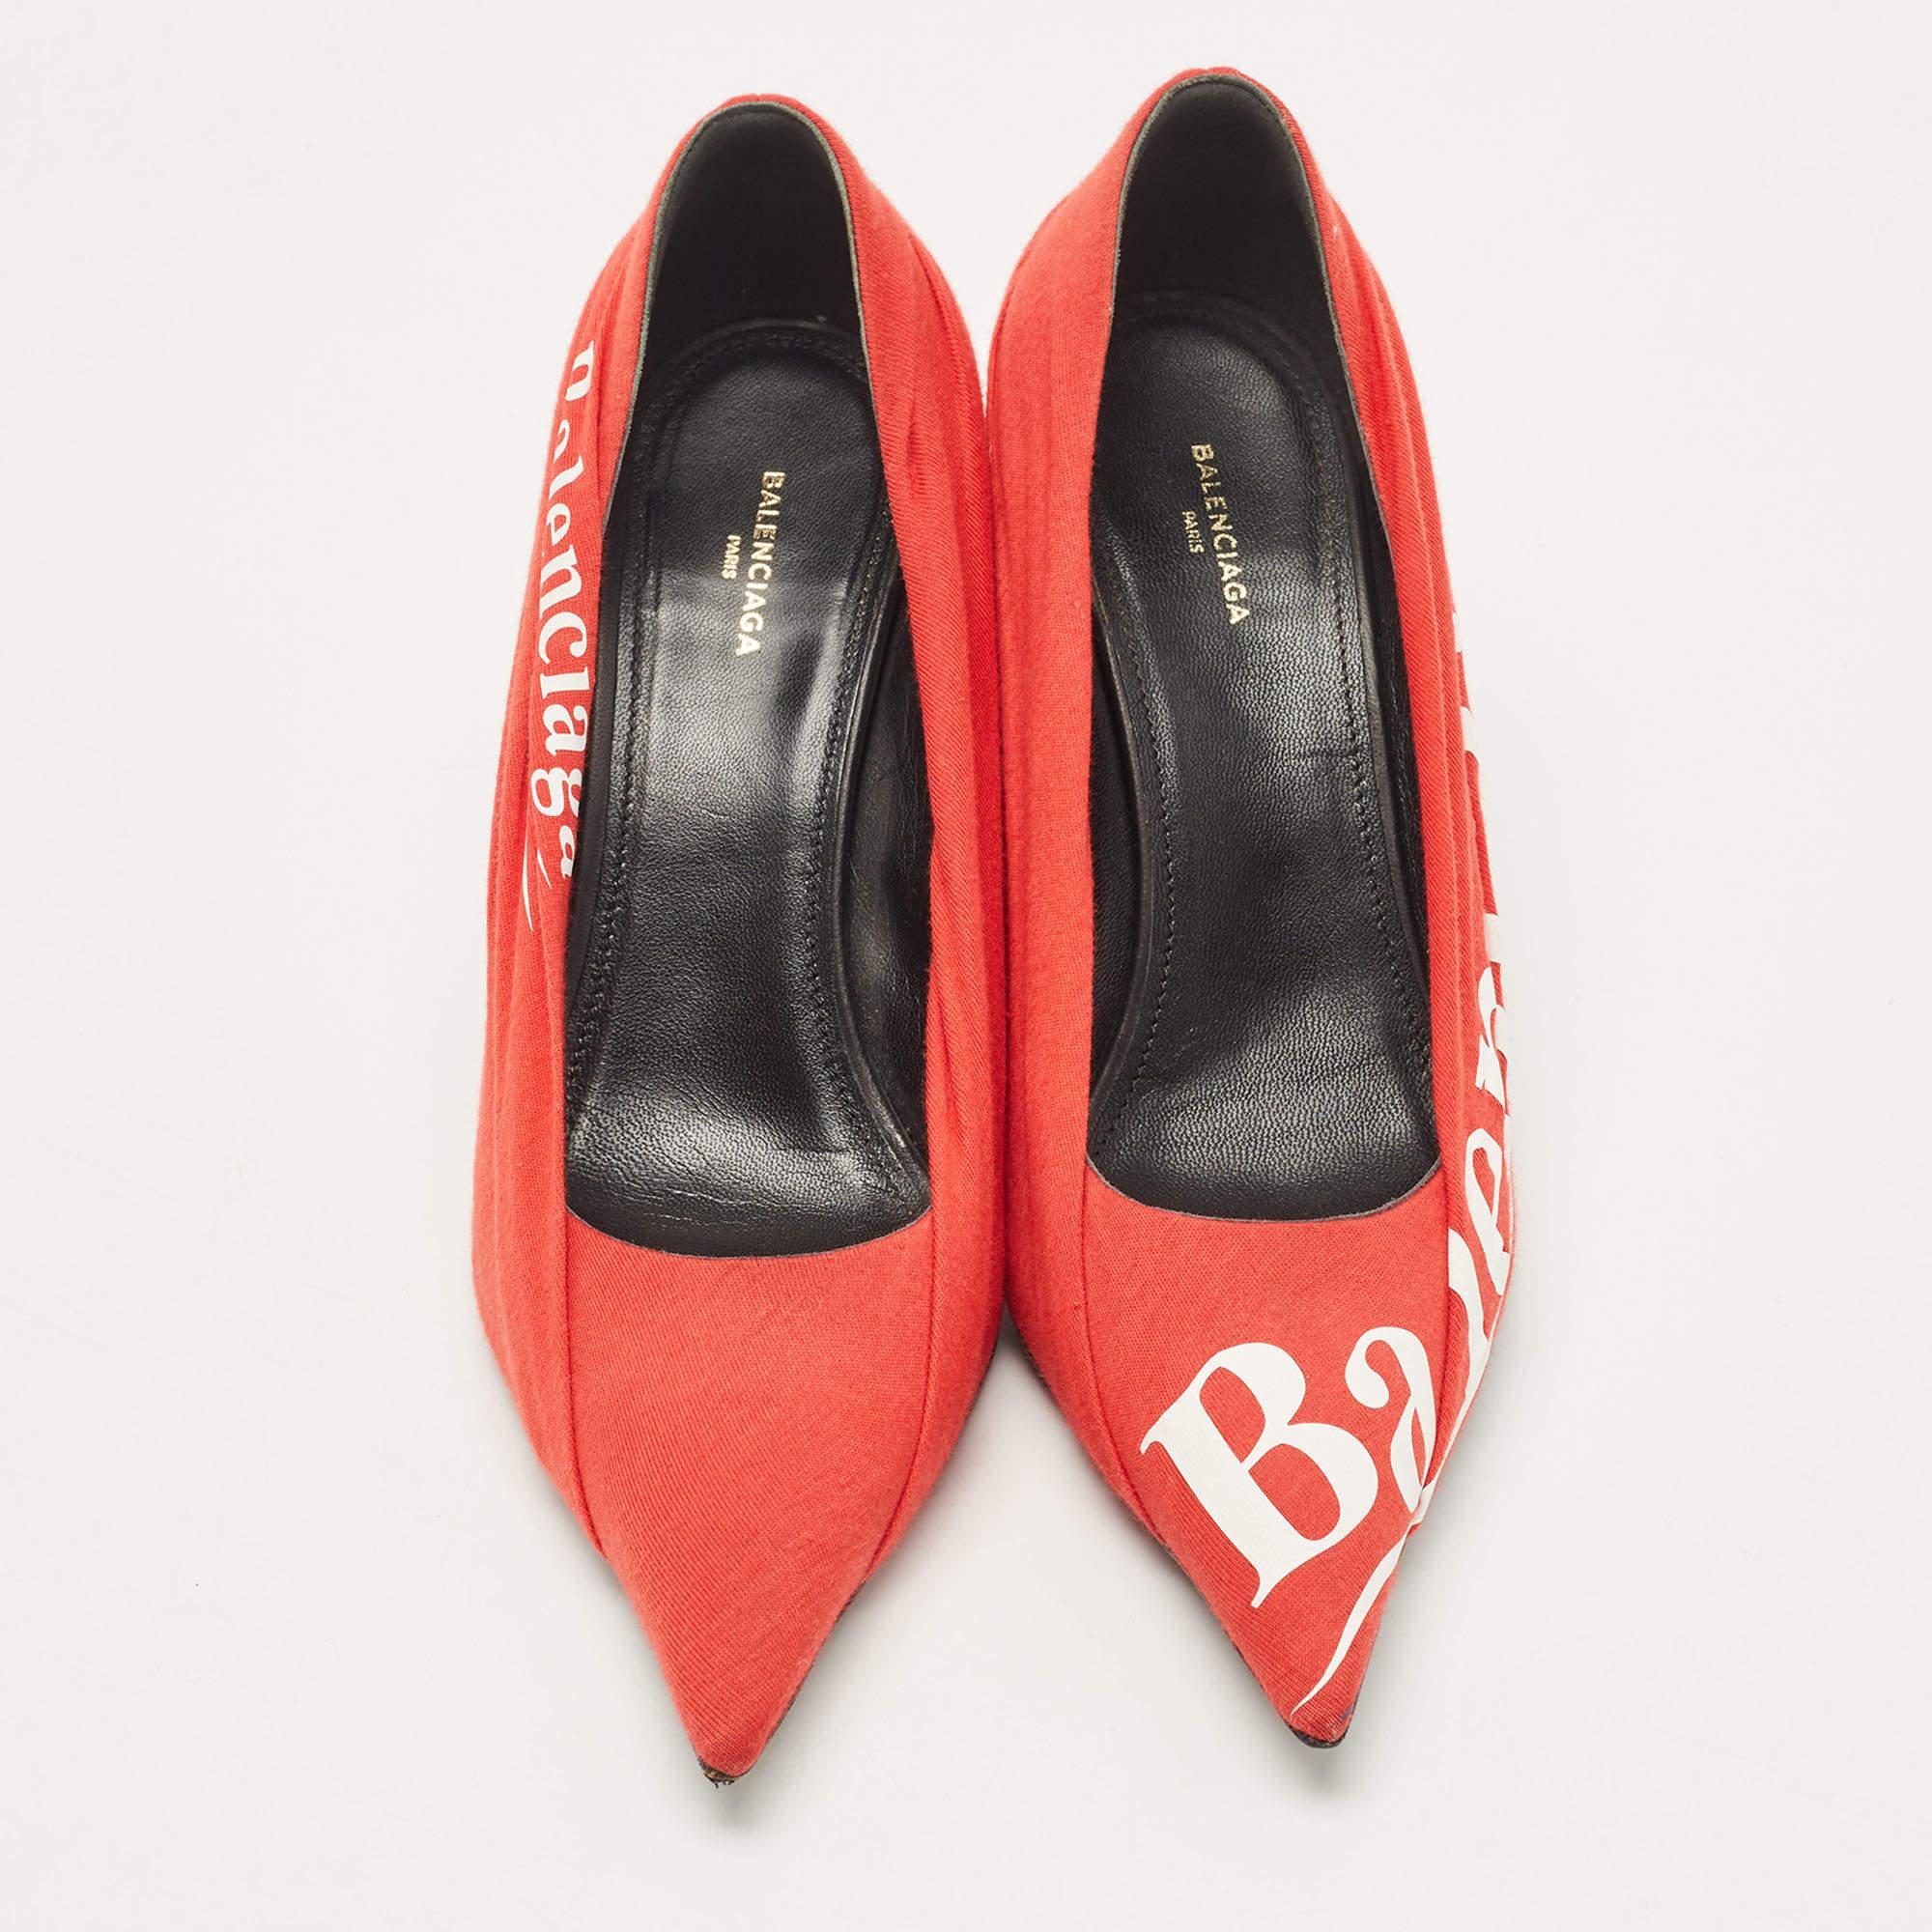 Balenciaga Red/Black Fabric and Leather Logo Knife Pumps Size 37 2